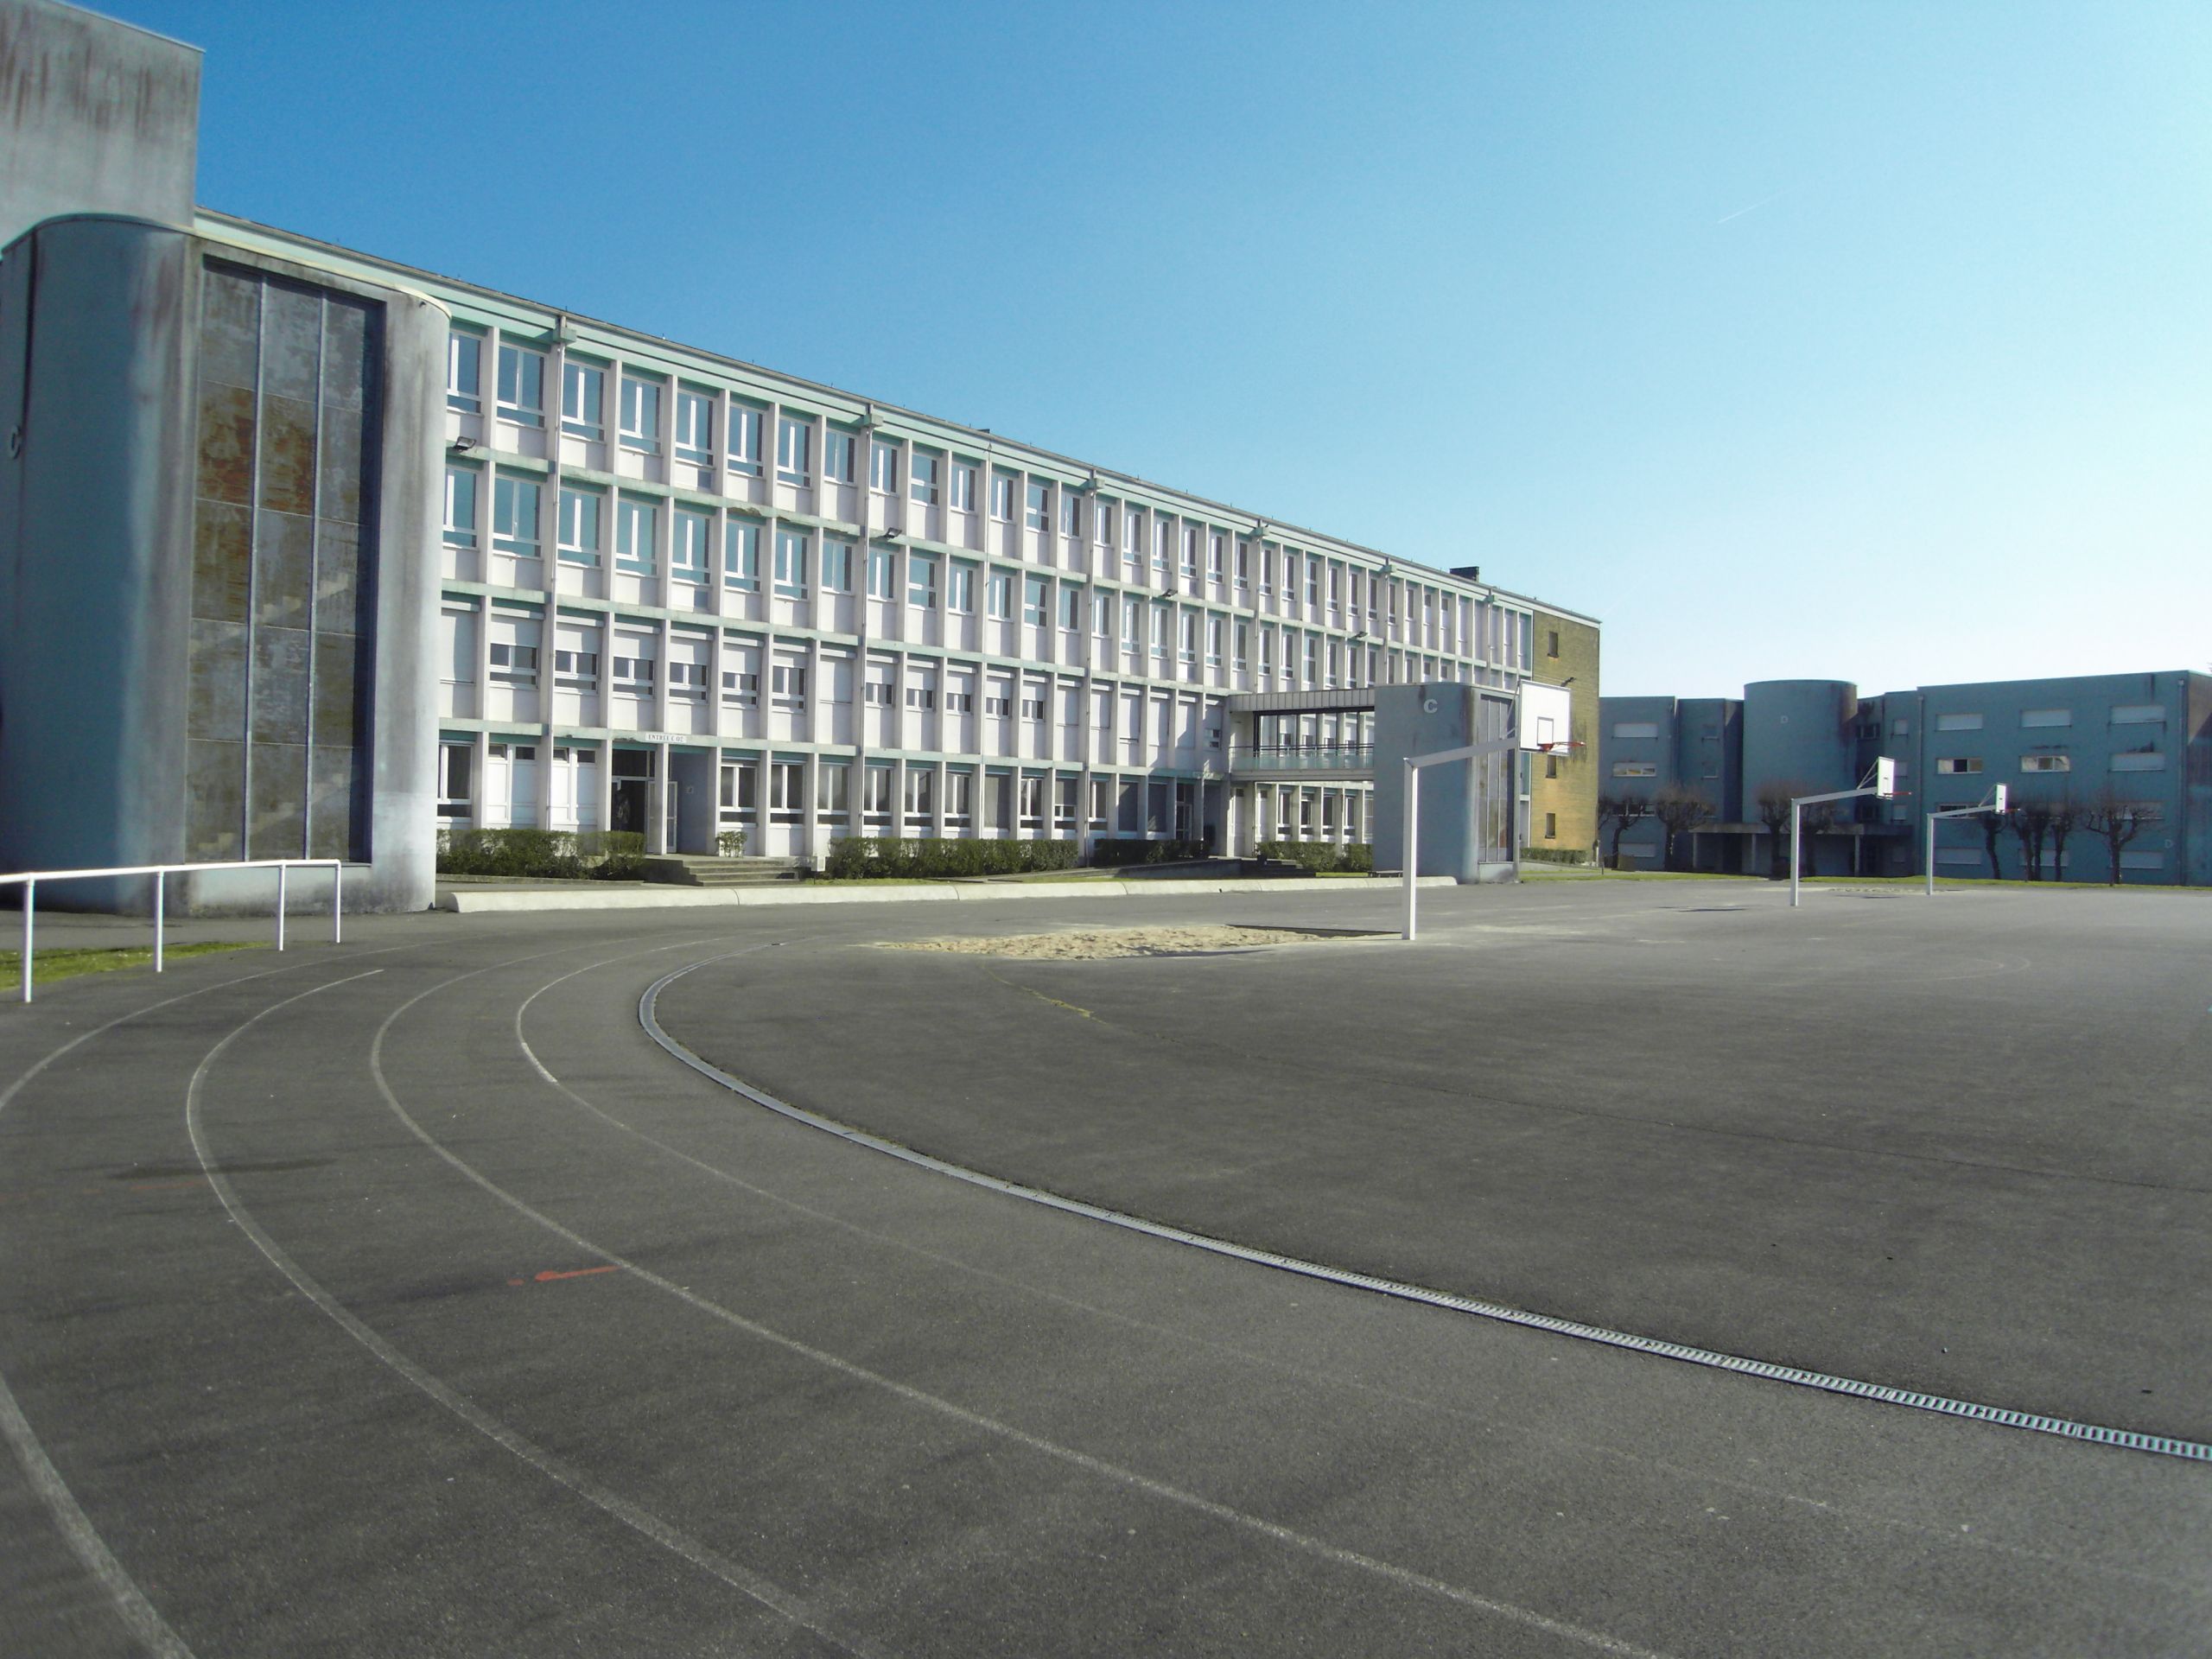 View of School s running track and one of the teaching buildings JPG